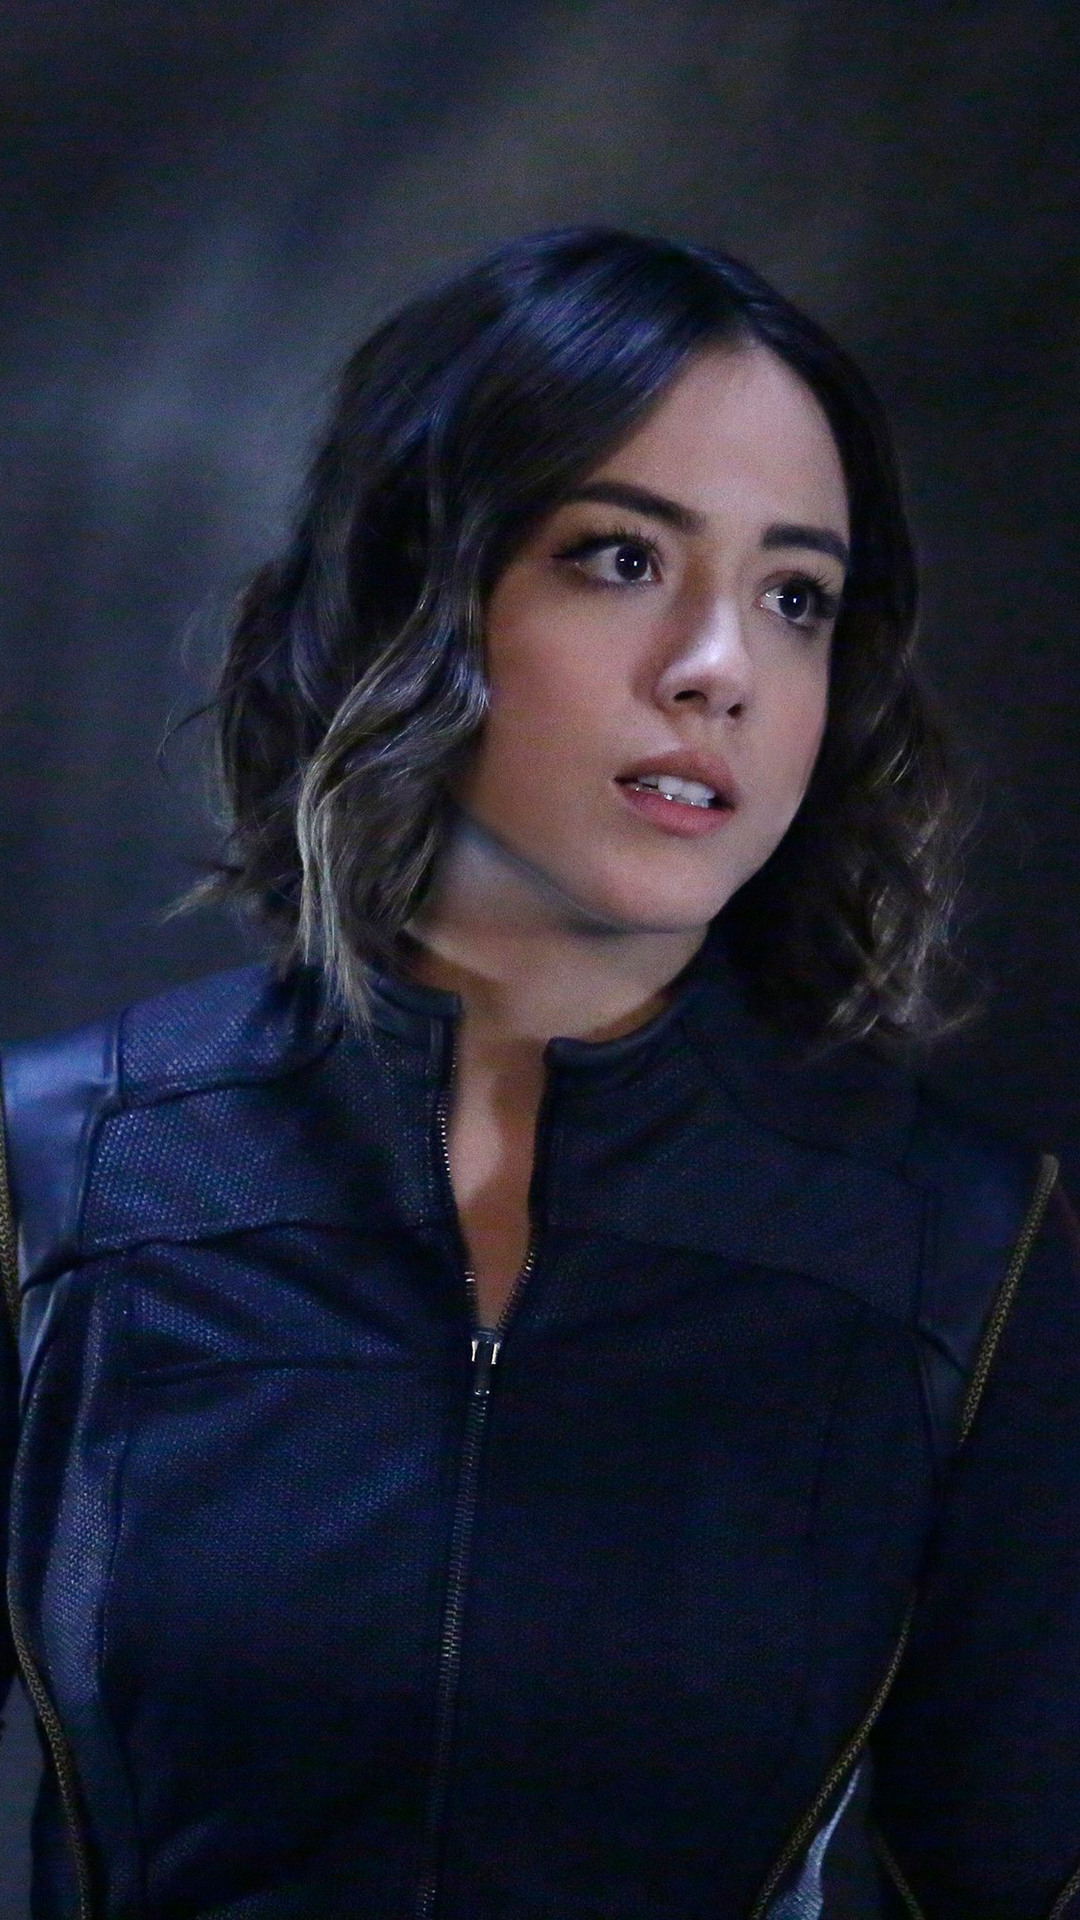 Chloe Bennet Agents of SHIELD Promo Wallpapers